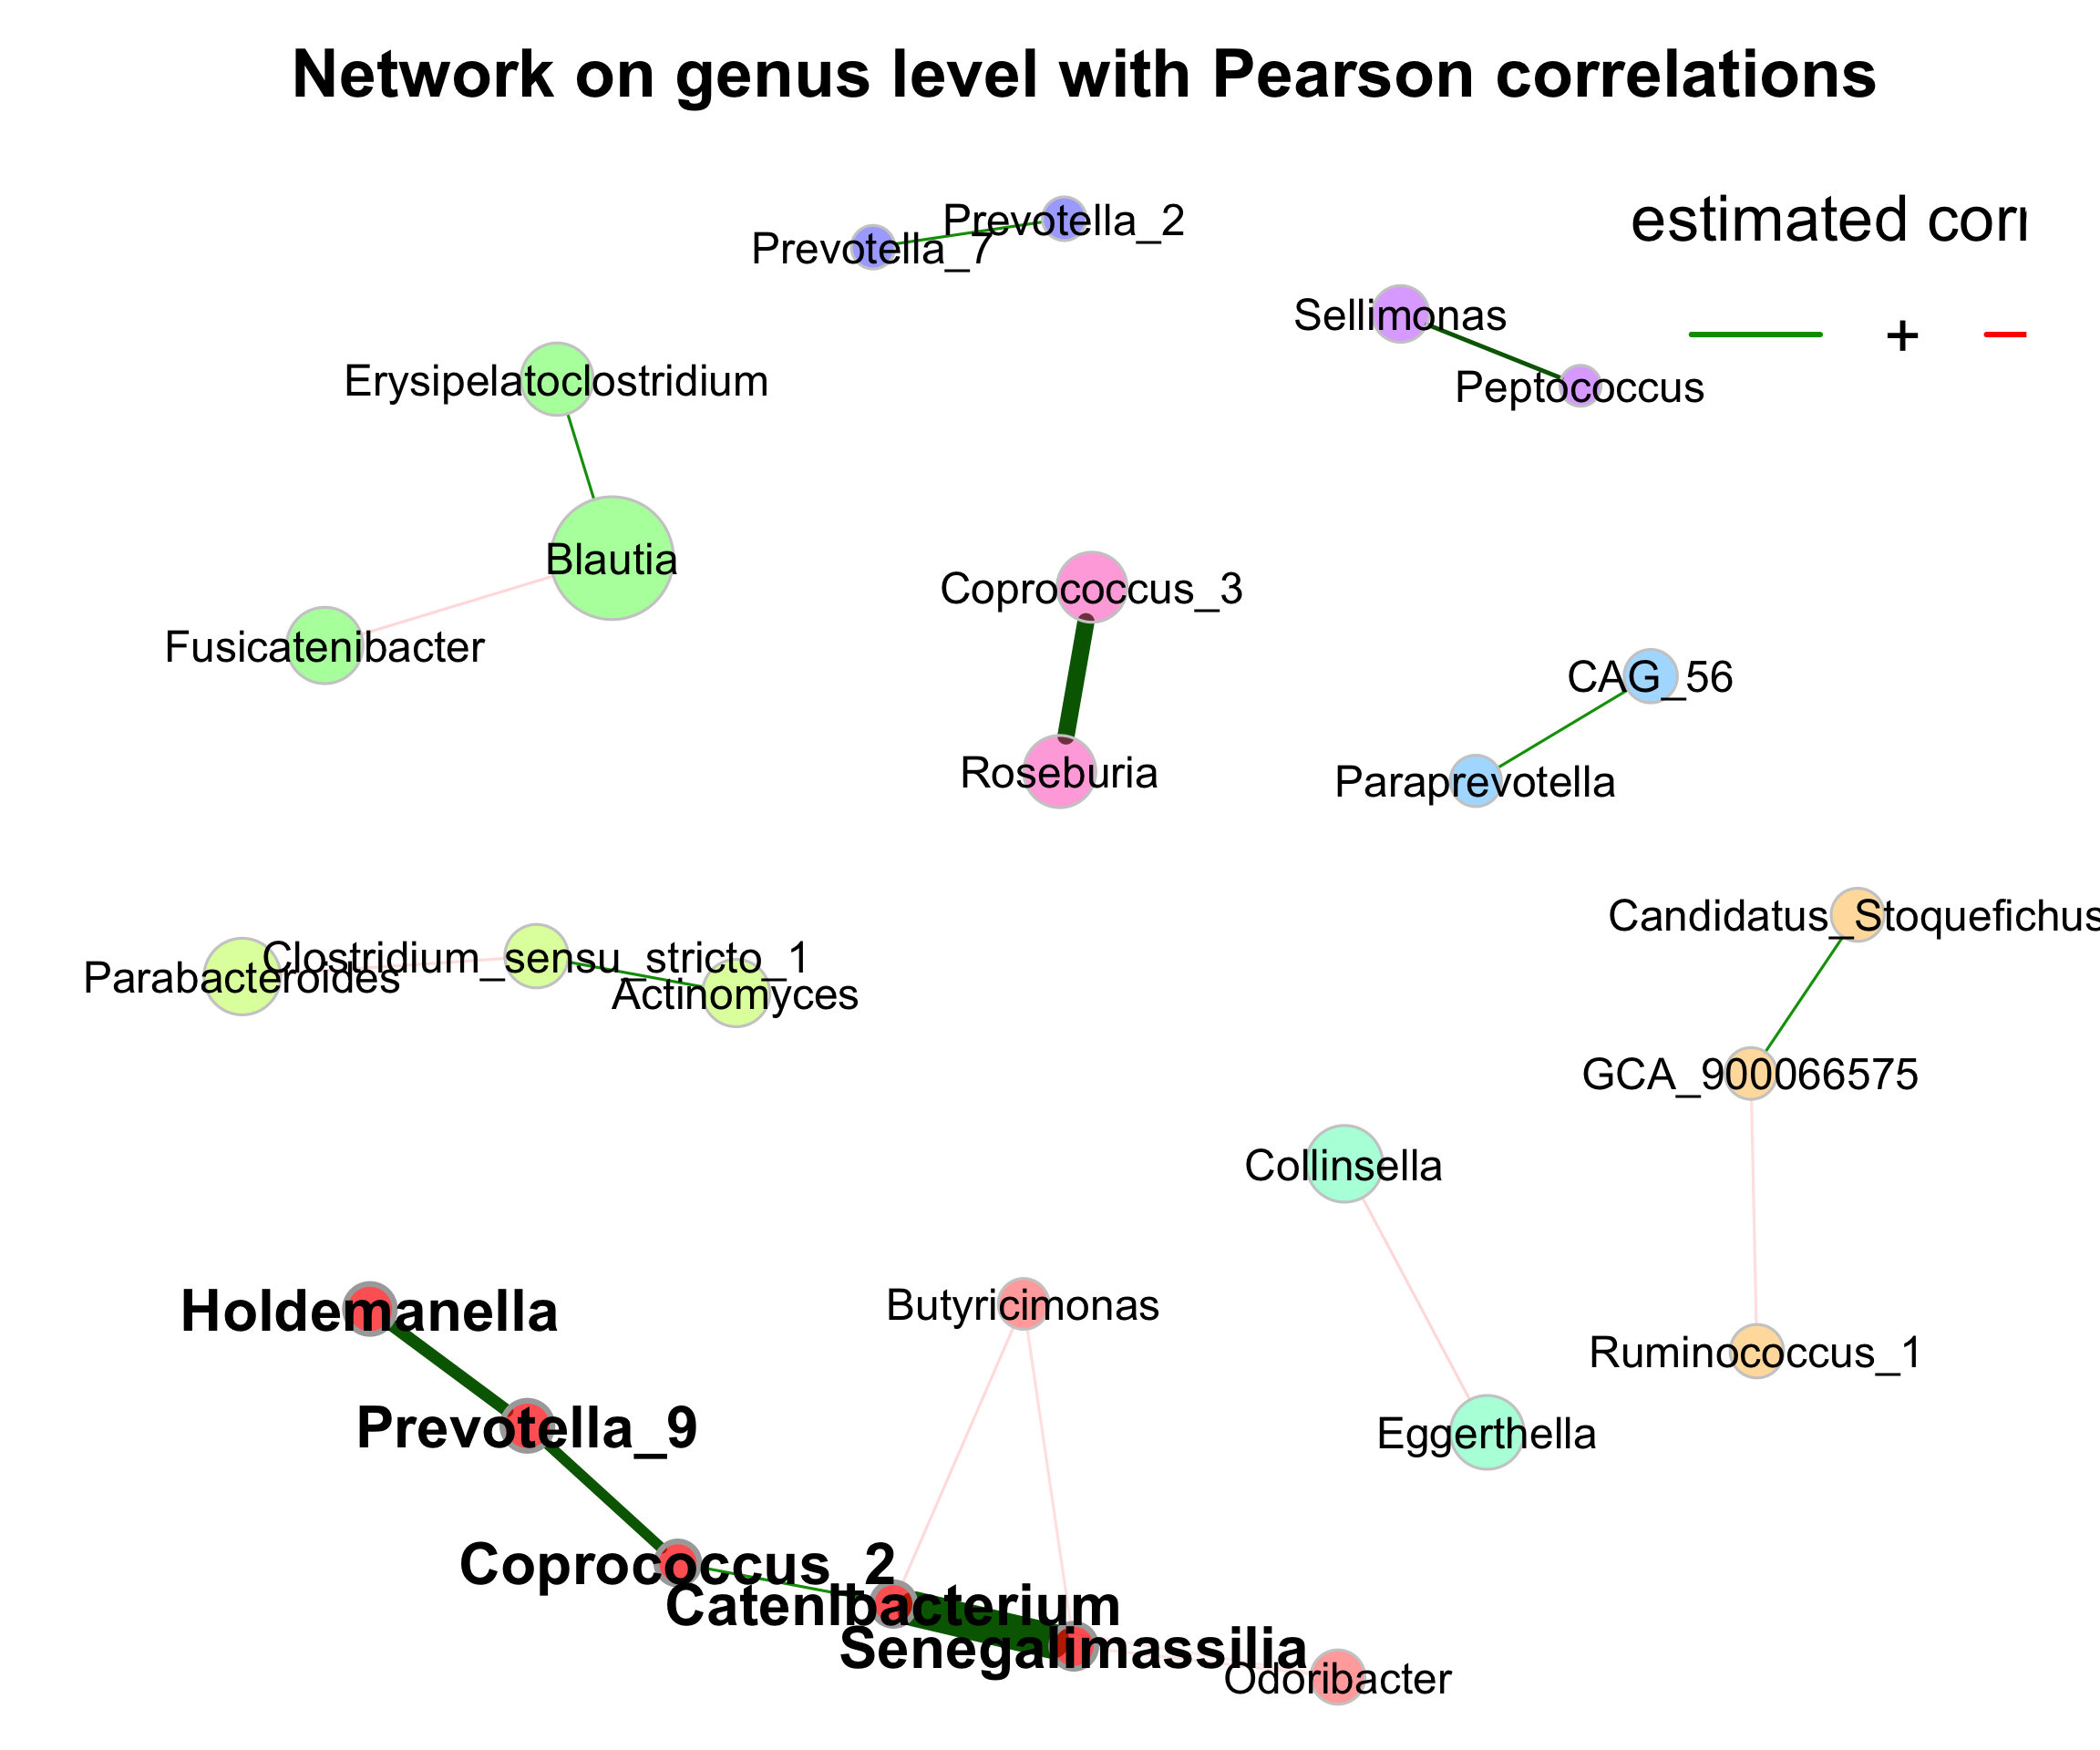 Network on 16s with Pearson correlations (Genus)